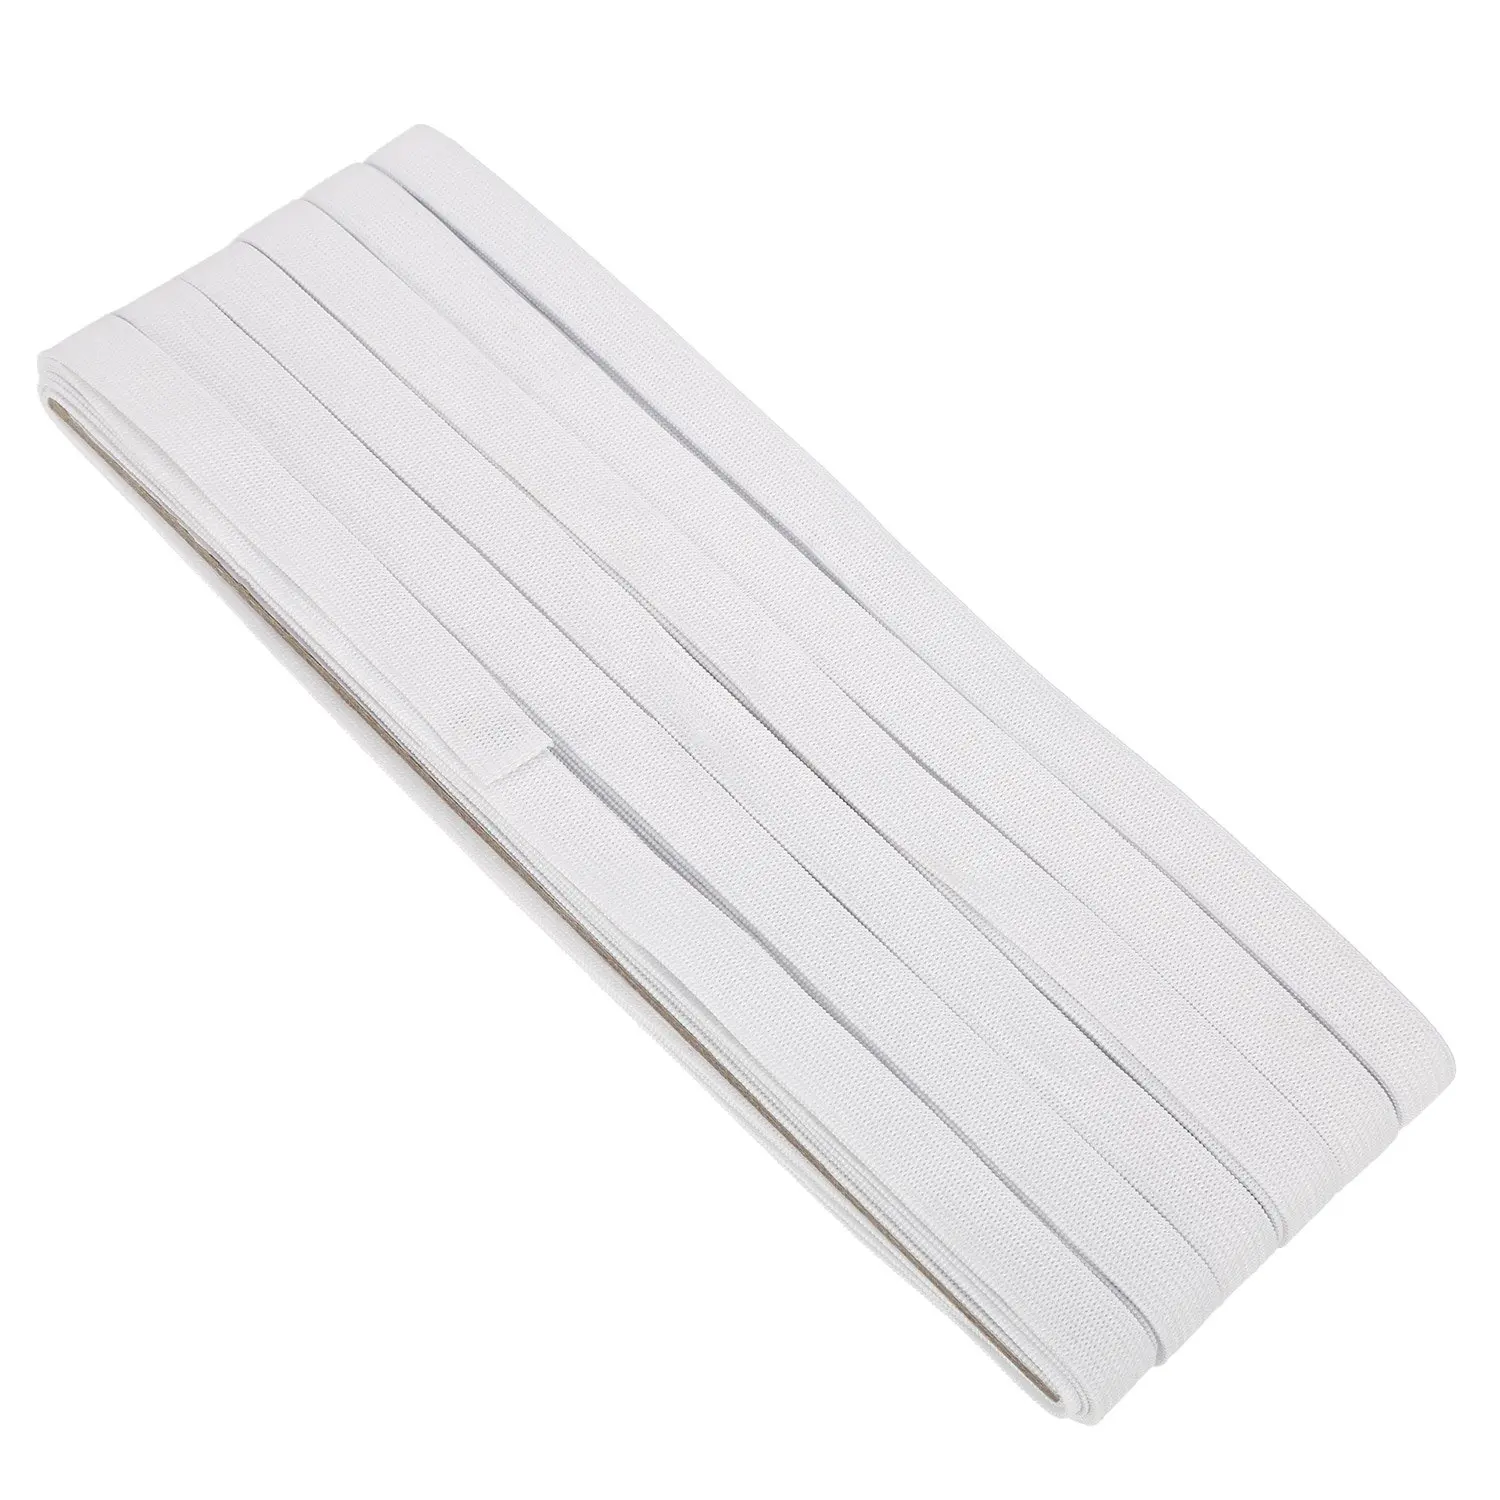 COTOWIN 1-inch White Plush Elastic by 3 Meters,Soft Comfortable Sewing Elastic Waistband Band